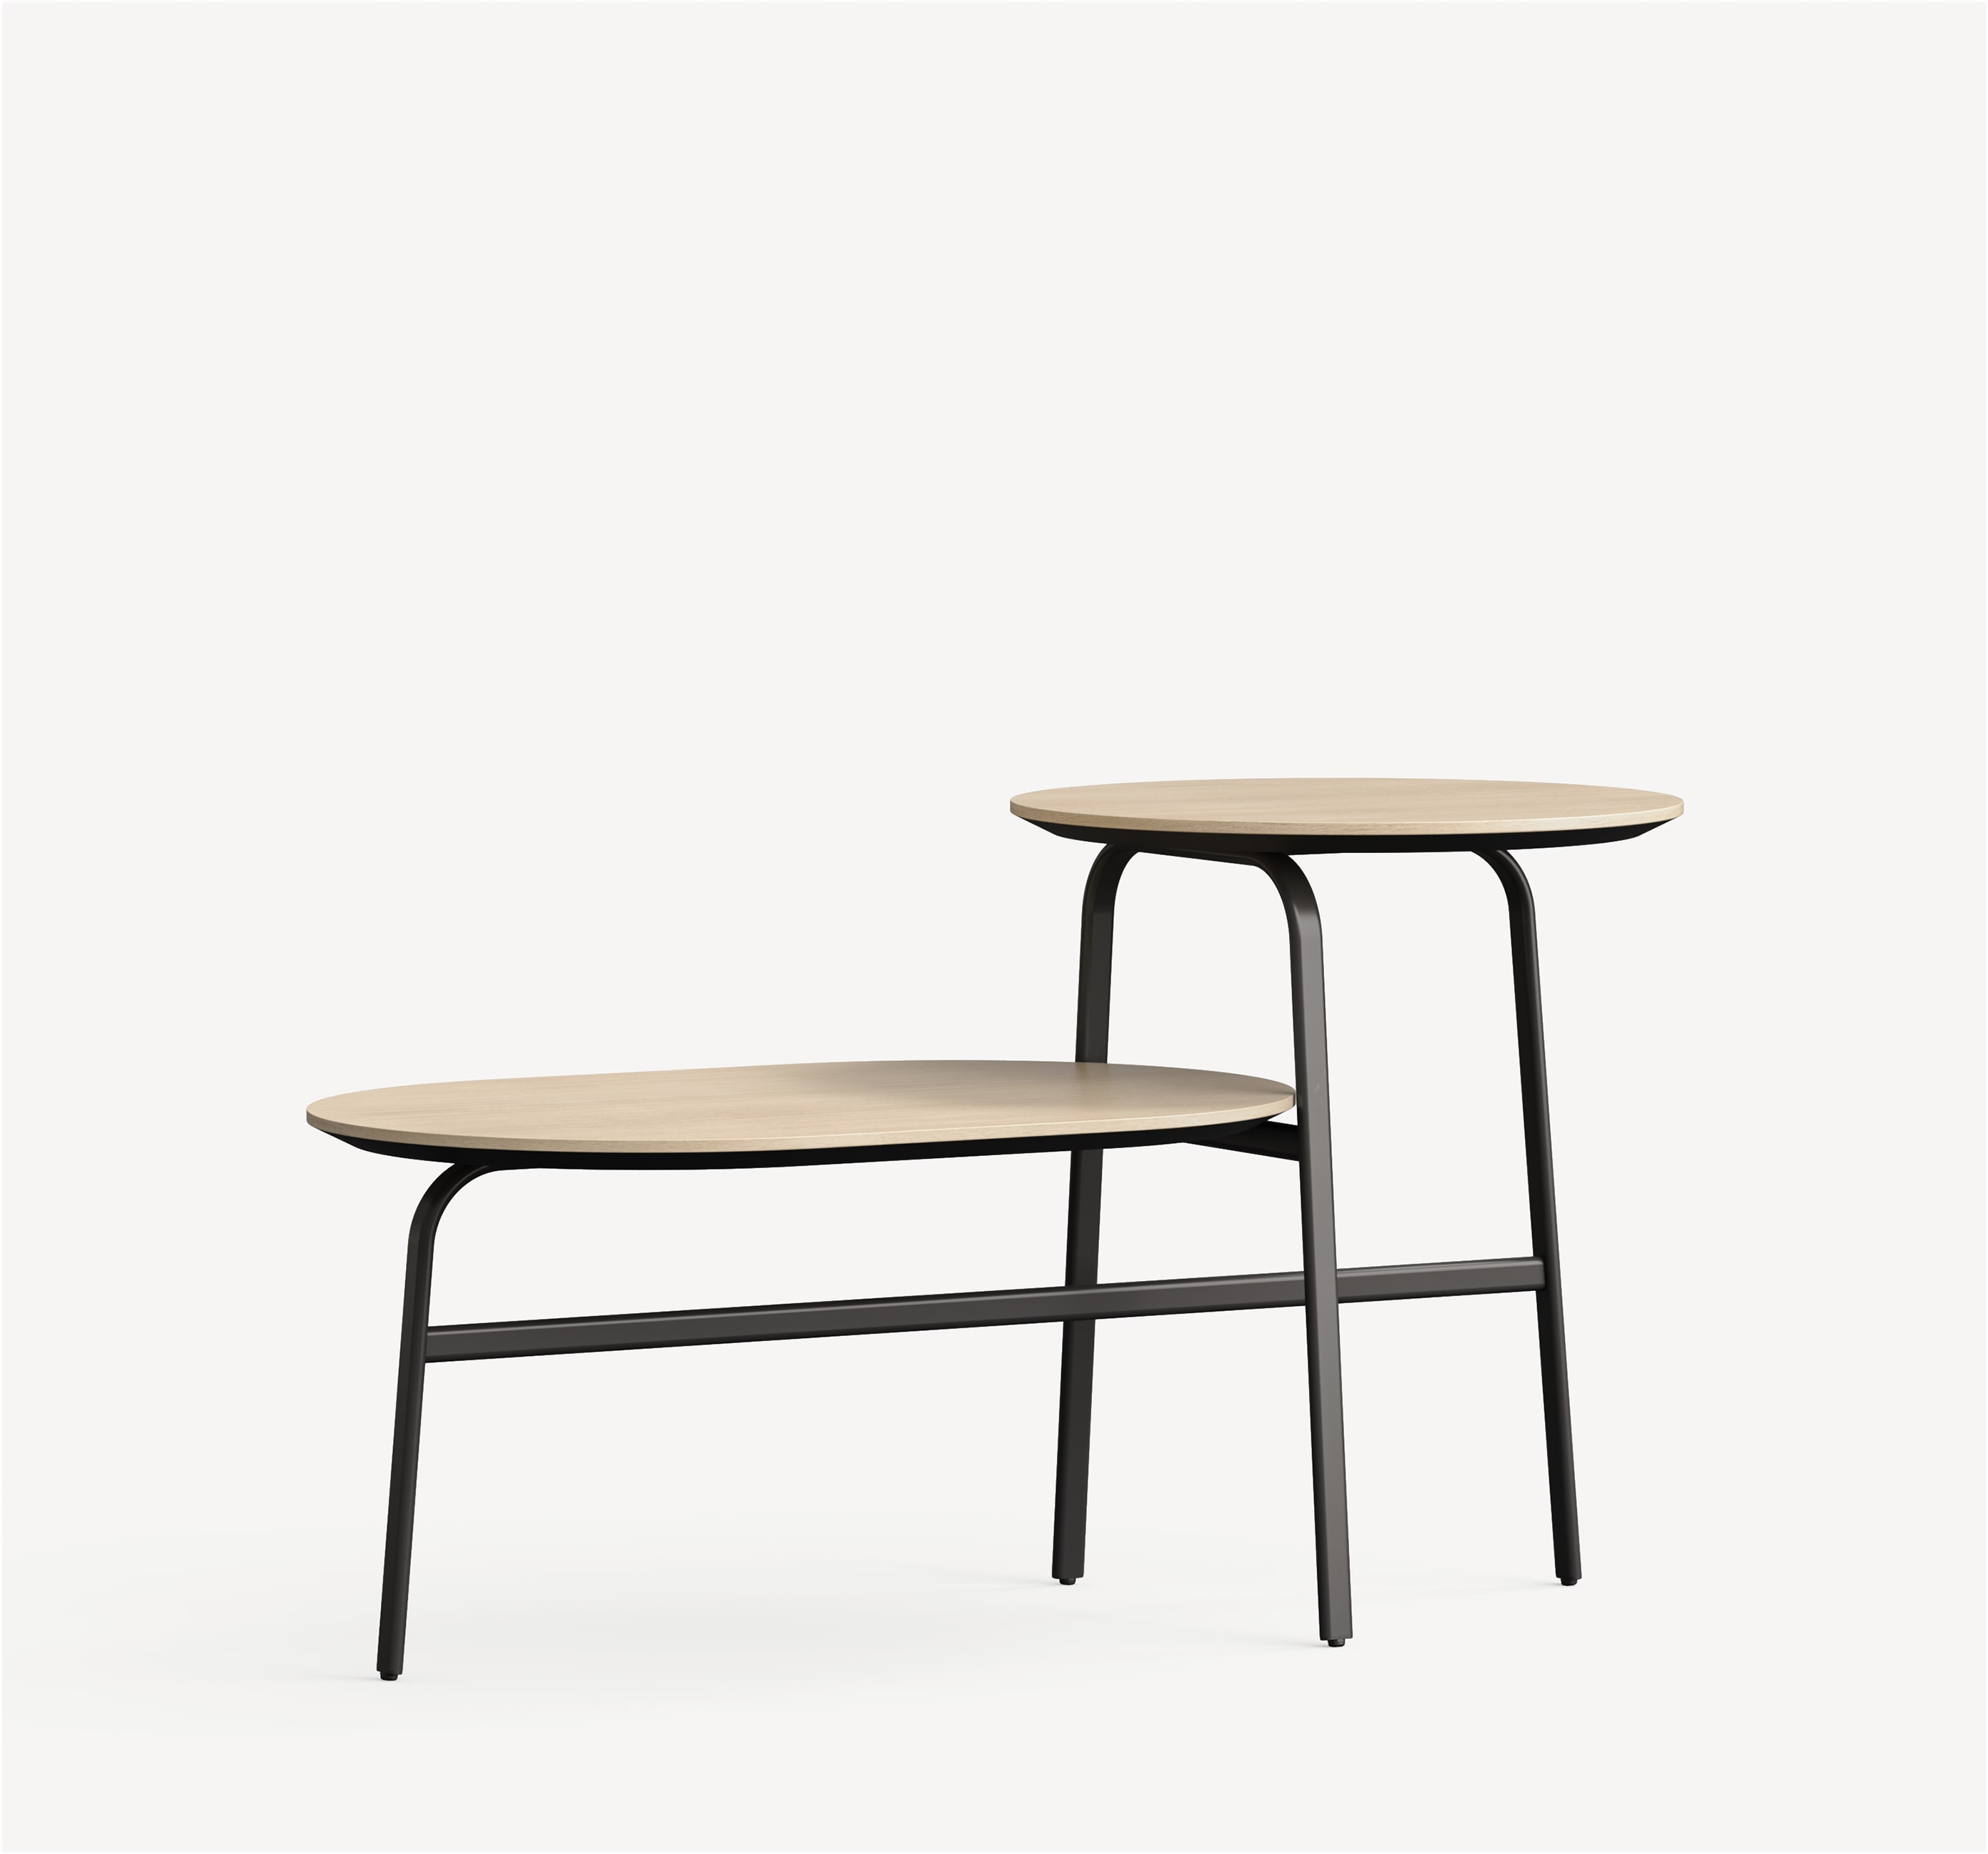 Front view of the Park Hi Lo occasional table with light wood tops and black frame.